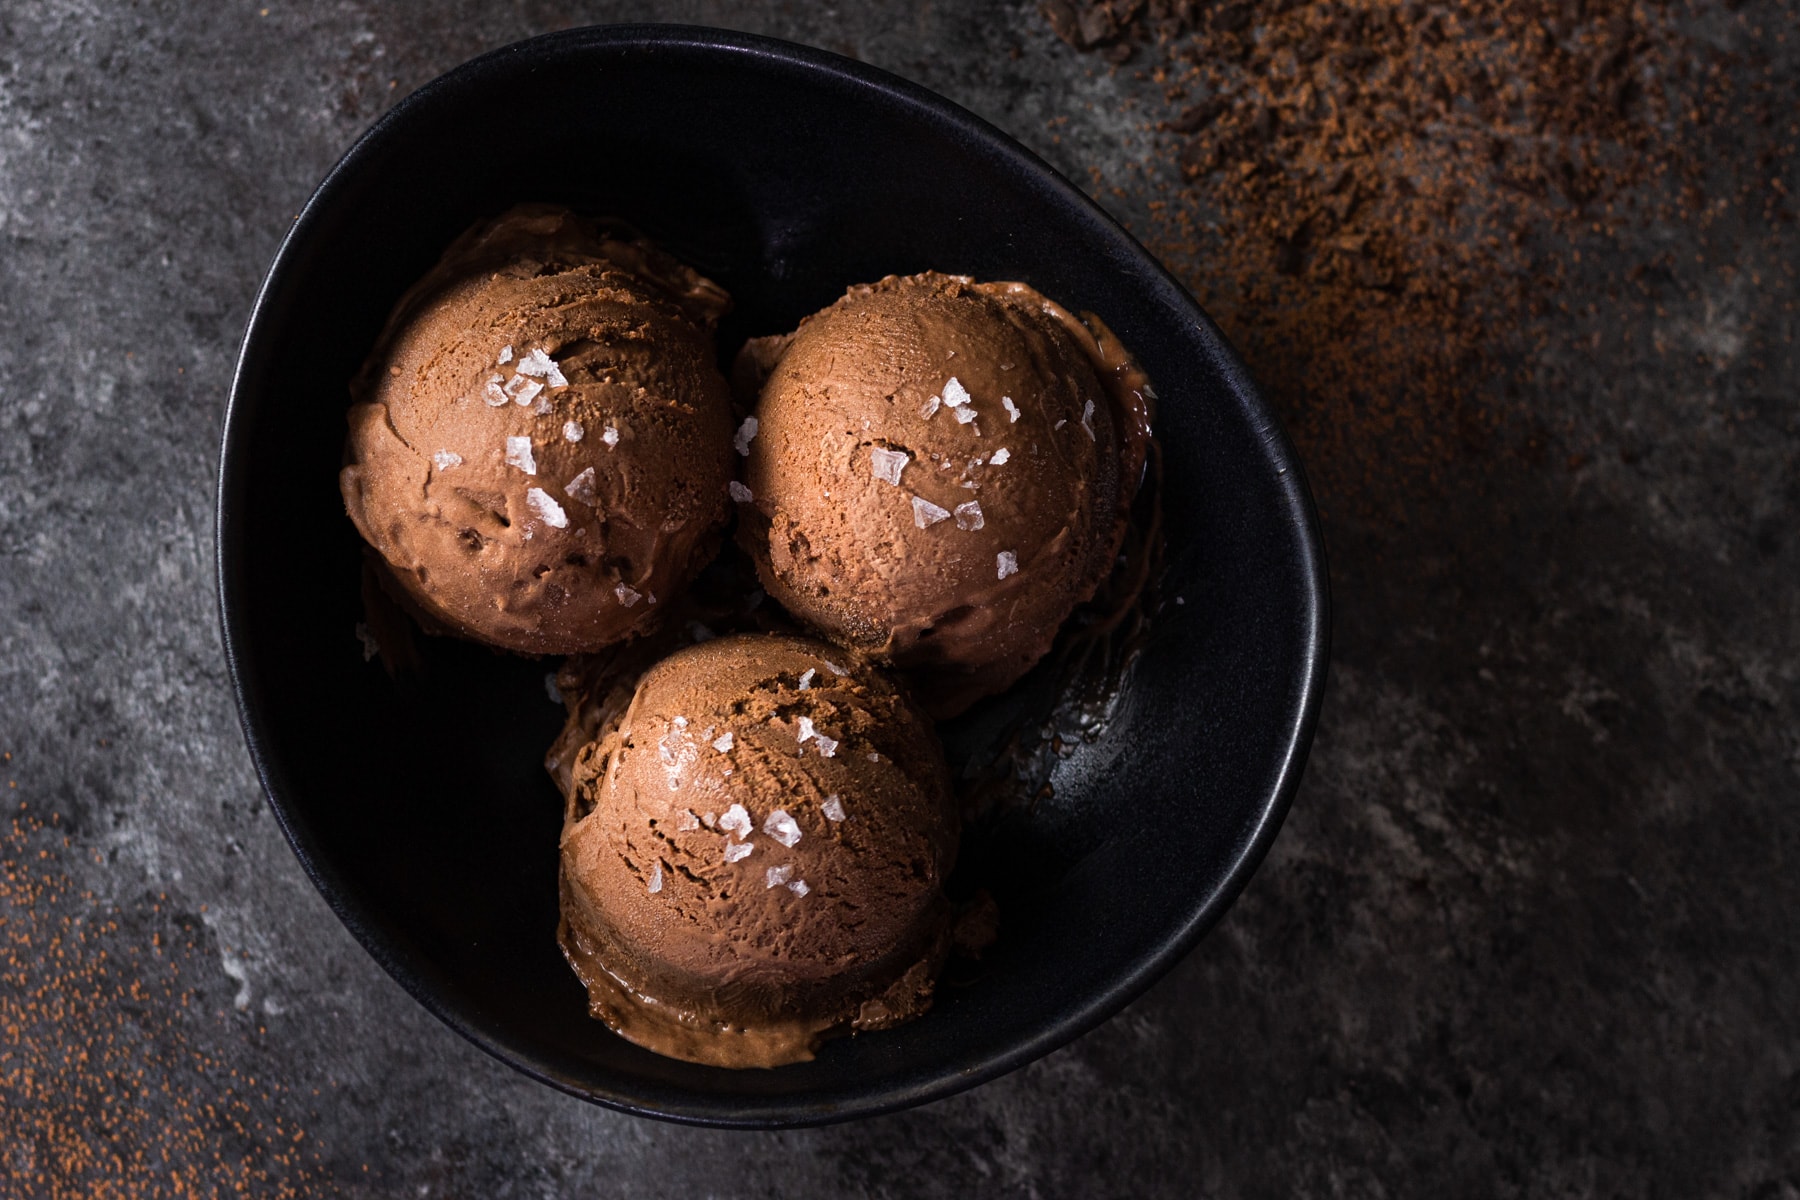 Overhead view of three scoops of chocolate olive oil ice cream topped with salt in a black bowl on a dark grey surface.